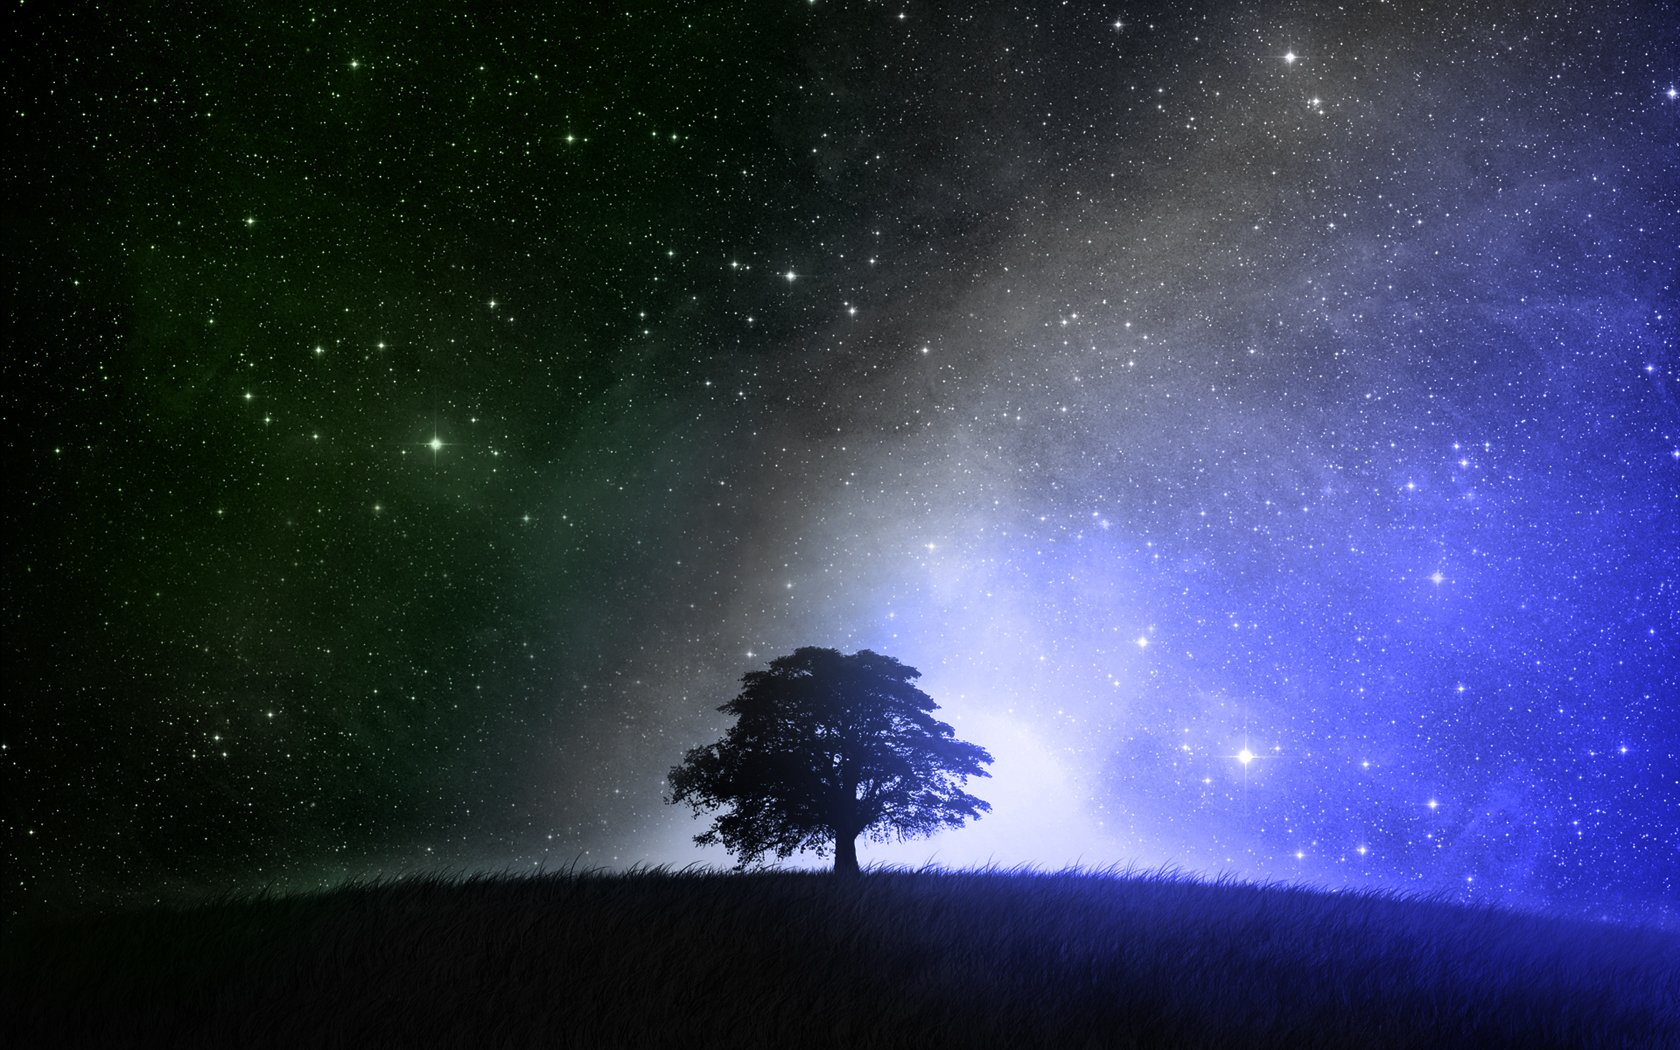  and the Stars at Night time   Random Wallpaper 35627326